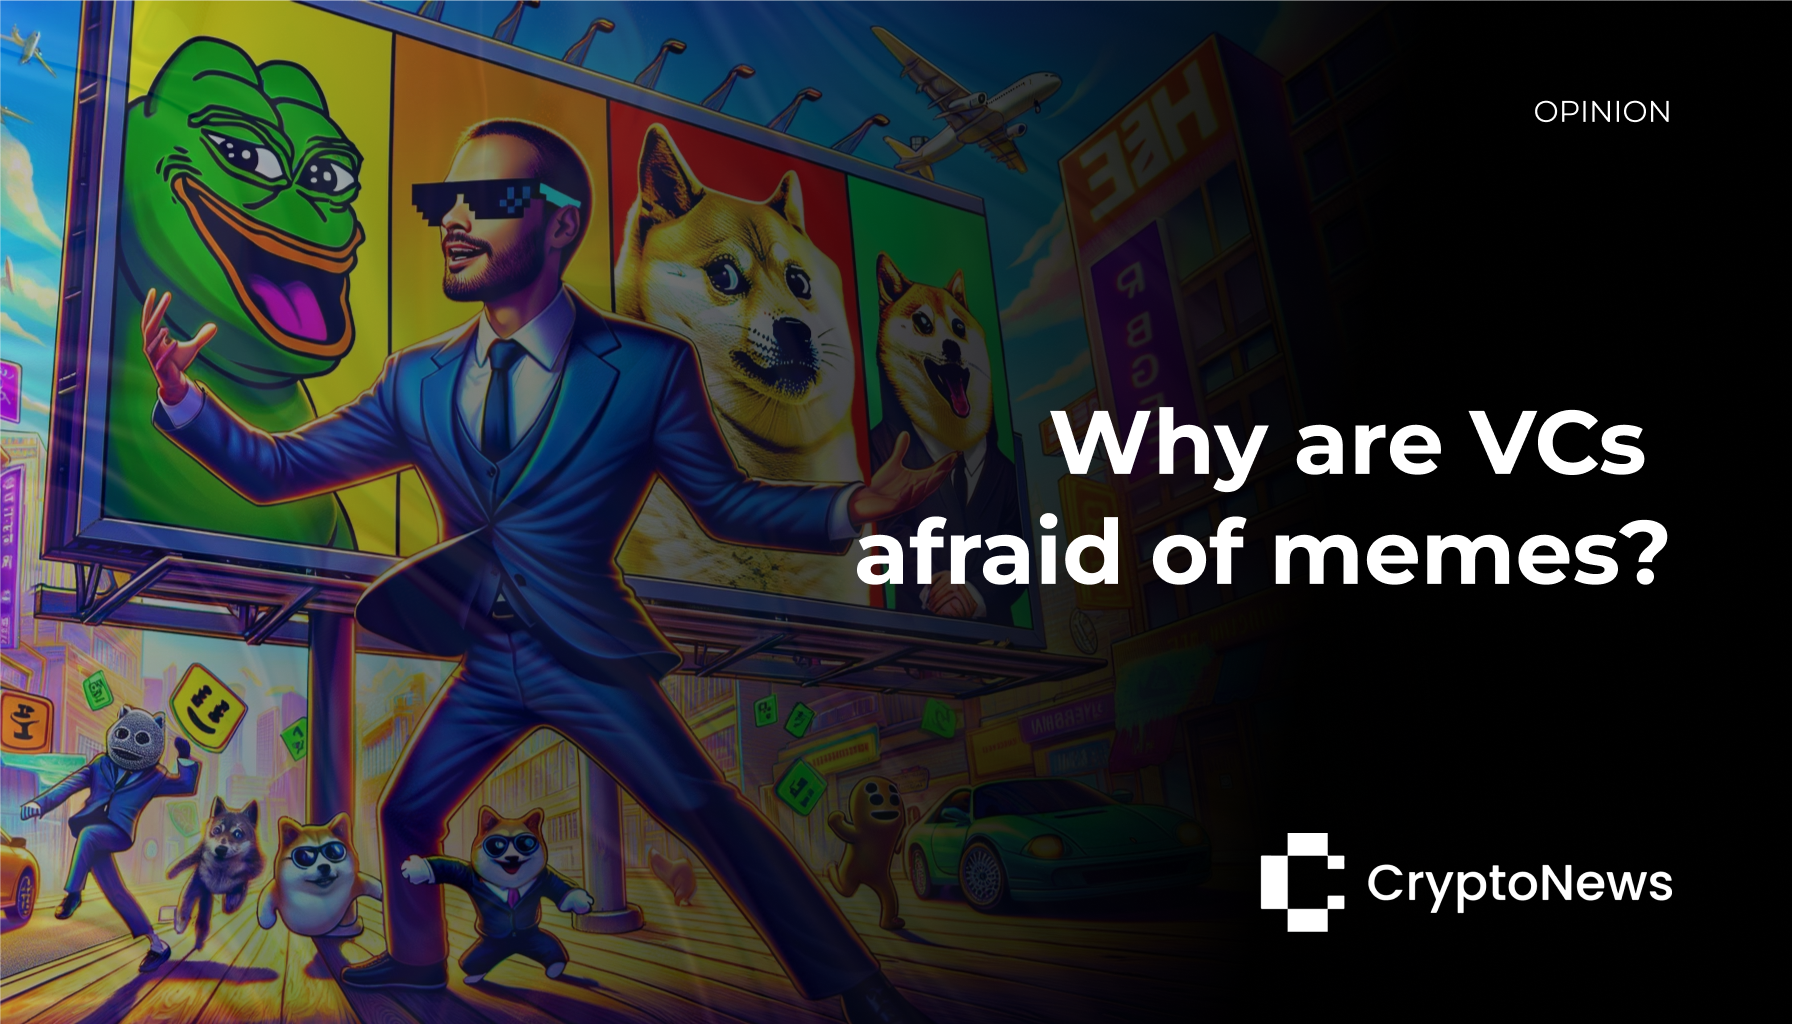 Colorful and dynamic image featuring meme icons like Doge, Pepe the Frog, and the Stonks man in a vibrant cityscape. A venture capitalist in a suit hides playfully behind a billboard, surrounded by playful meme characters.